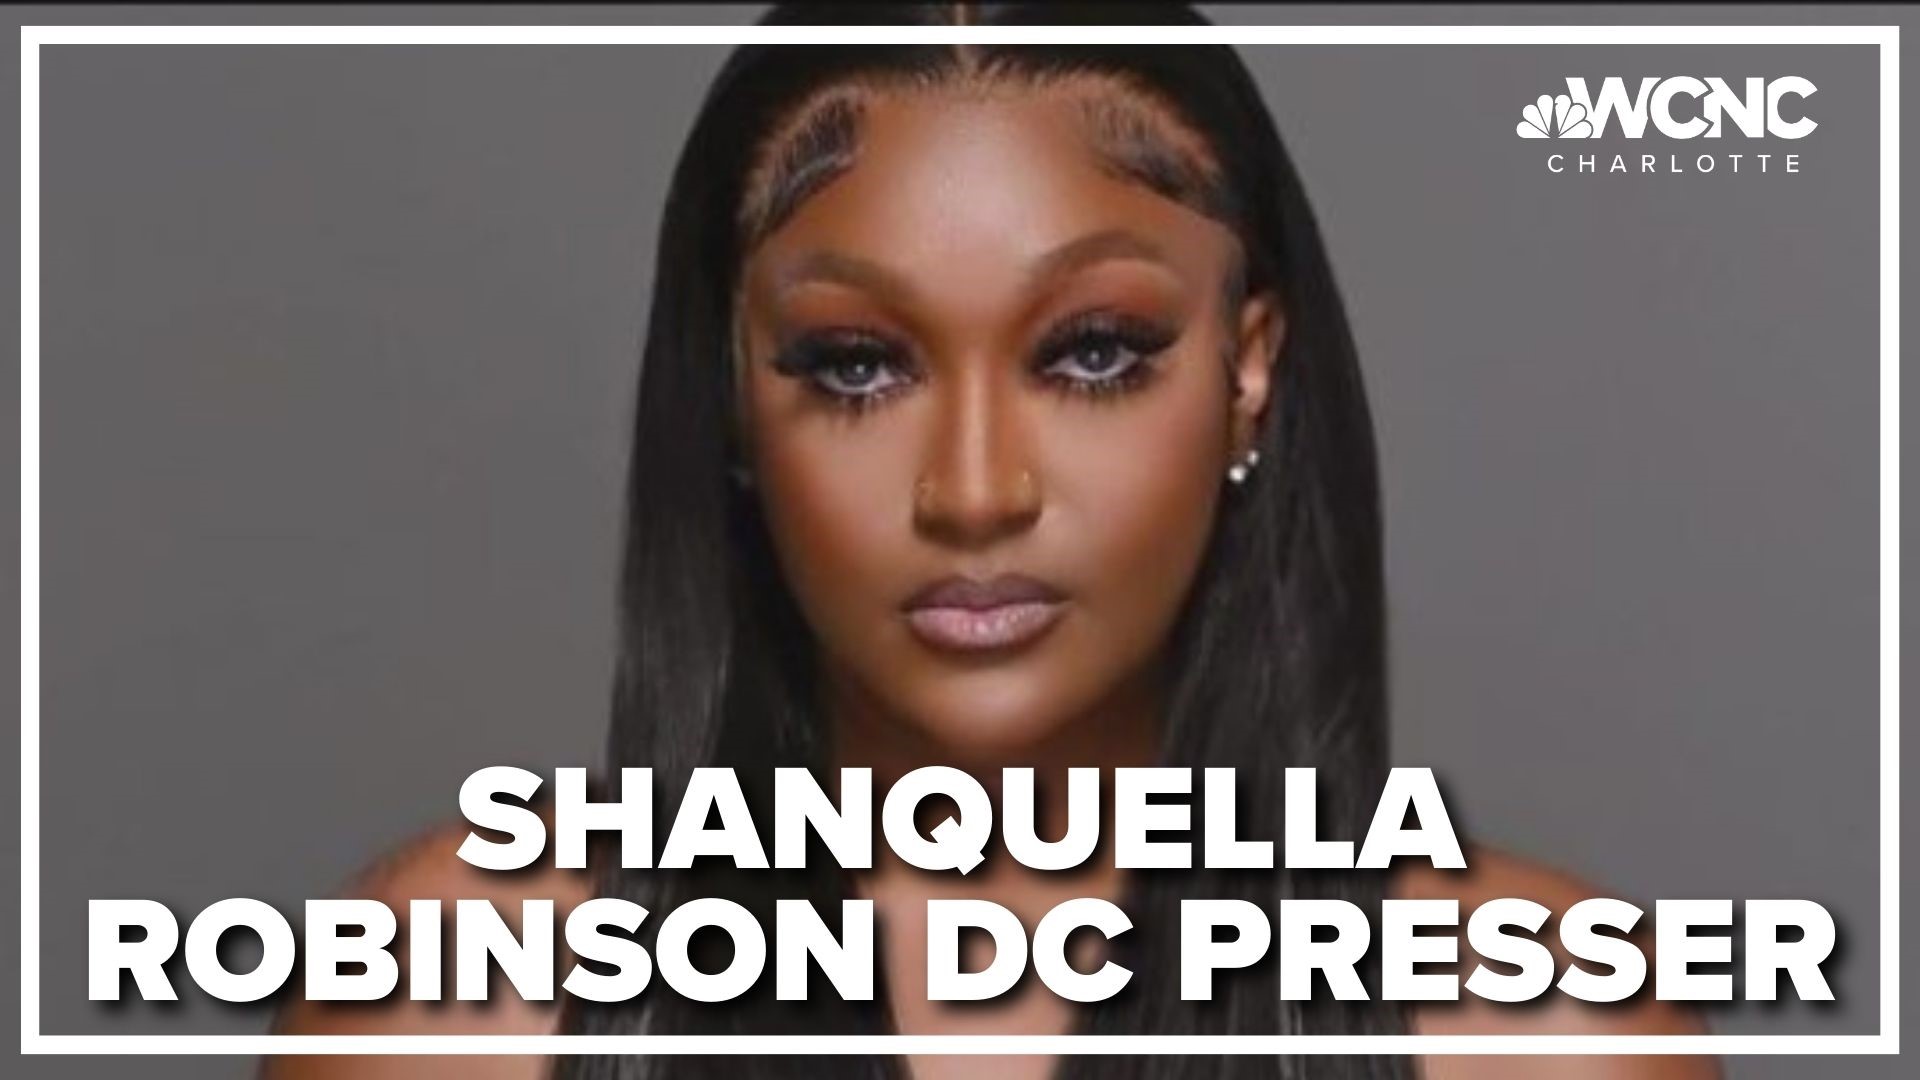 Calls for justice for Shanquella Robinson at our nation's capitol today.